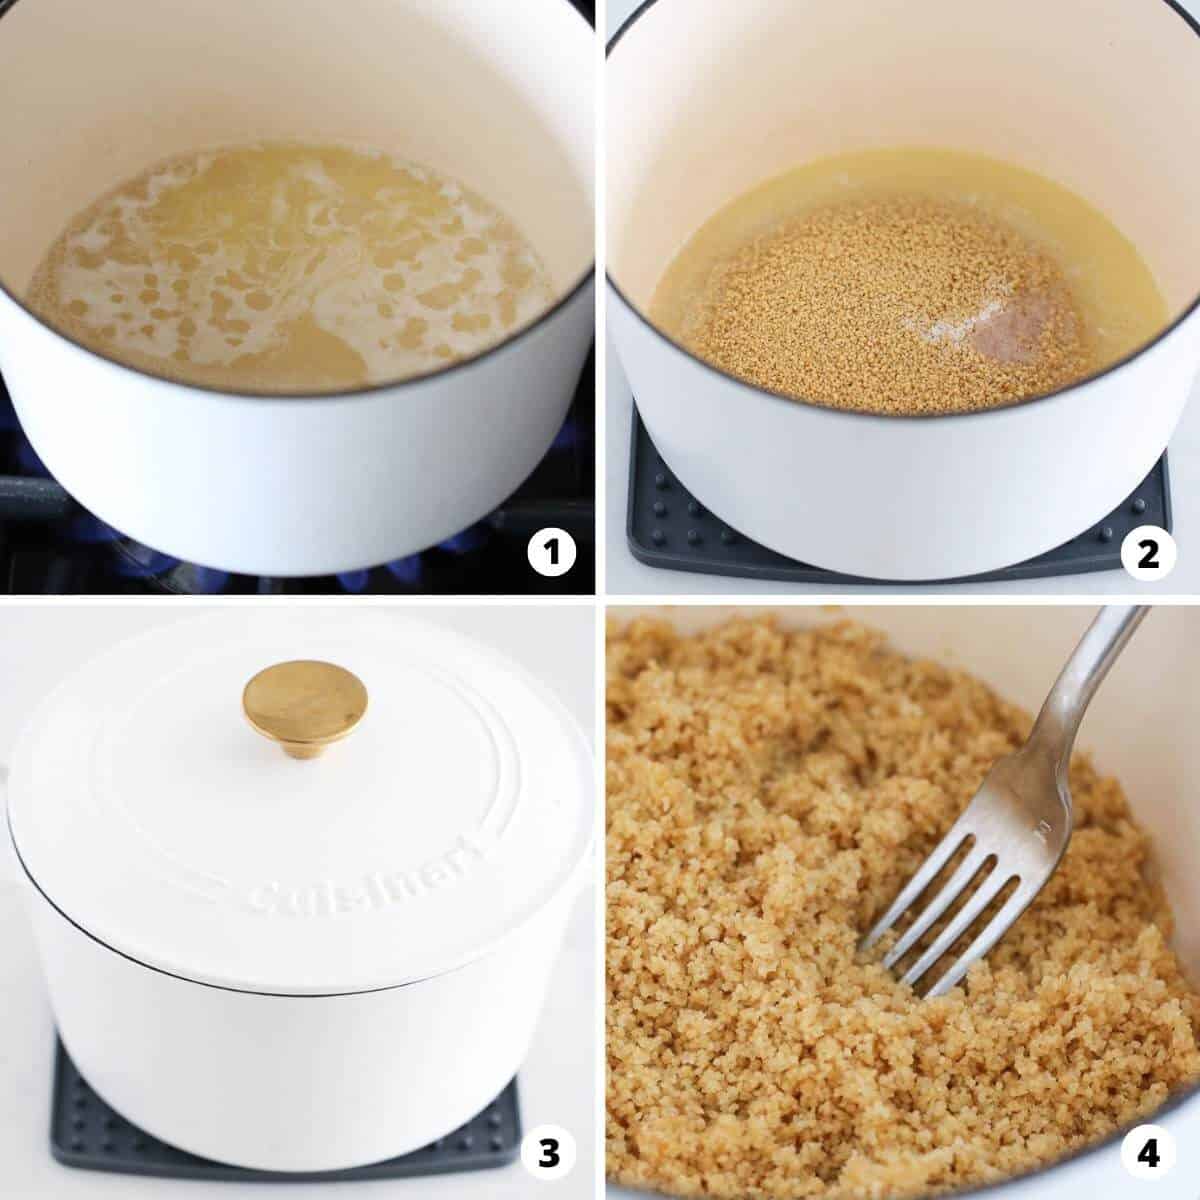 Showing how to make couscous in a 4 step collage.